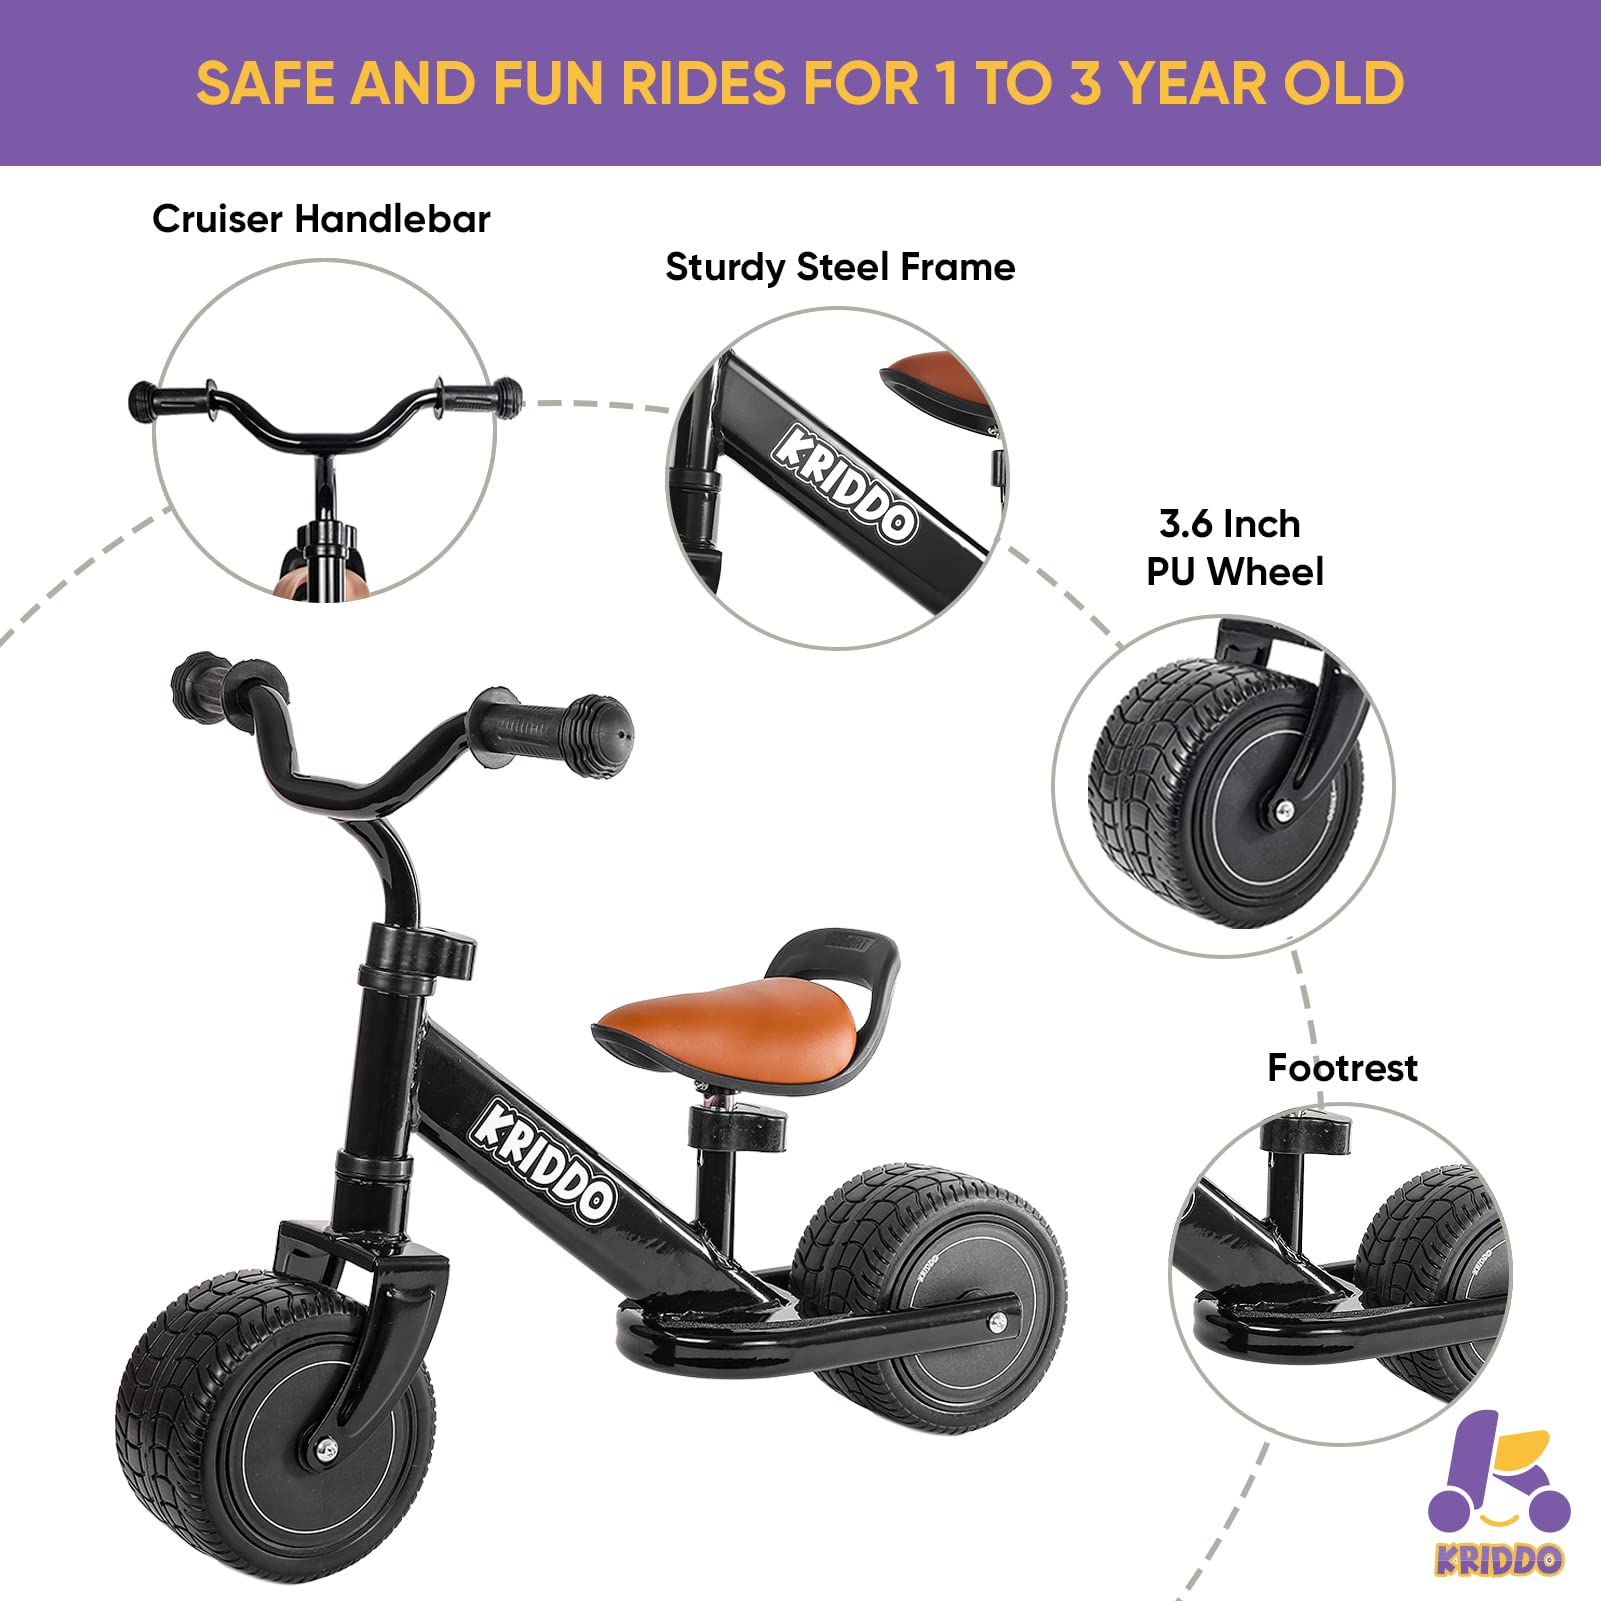 KRIDDO Baby Balance Bike 1-3 Year Old, Mini Cruiser Bike for One Year Old First Birthday Gifts Baby Toys 12 Months to 3 Year Old, Black